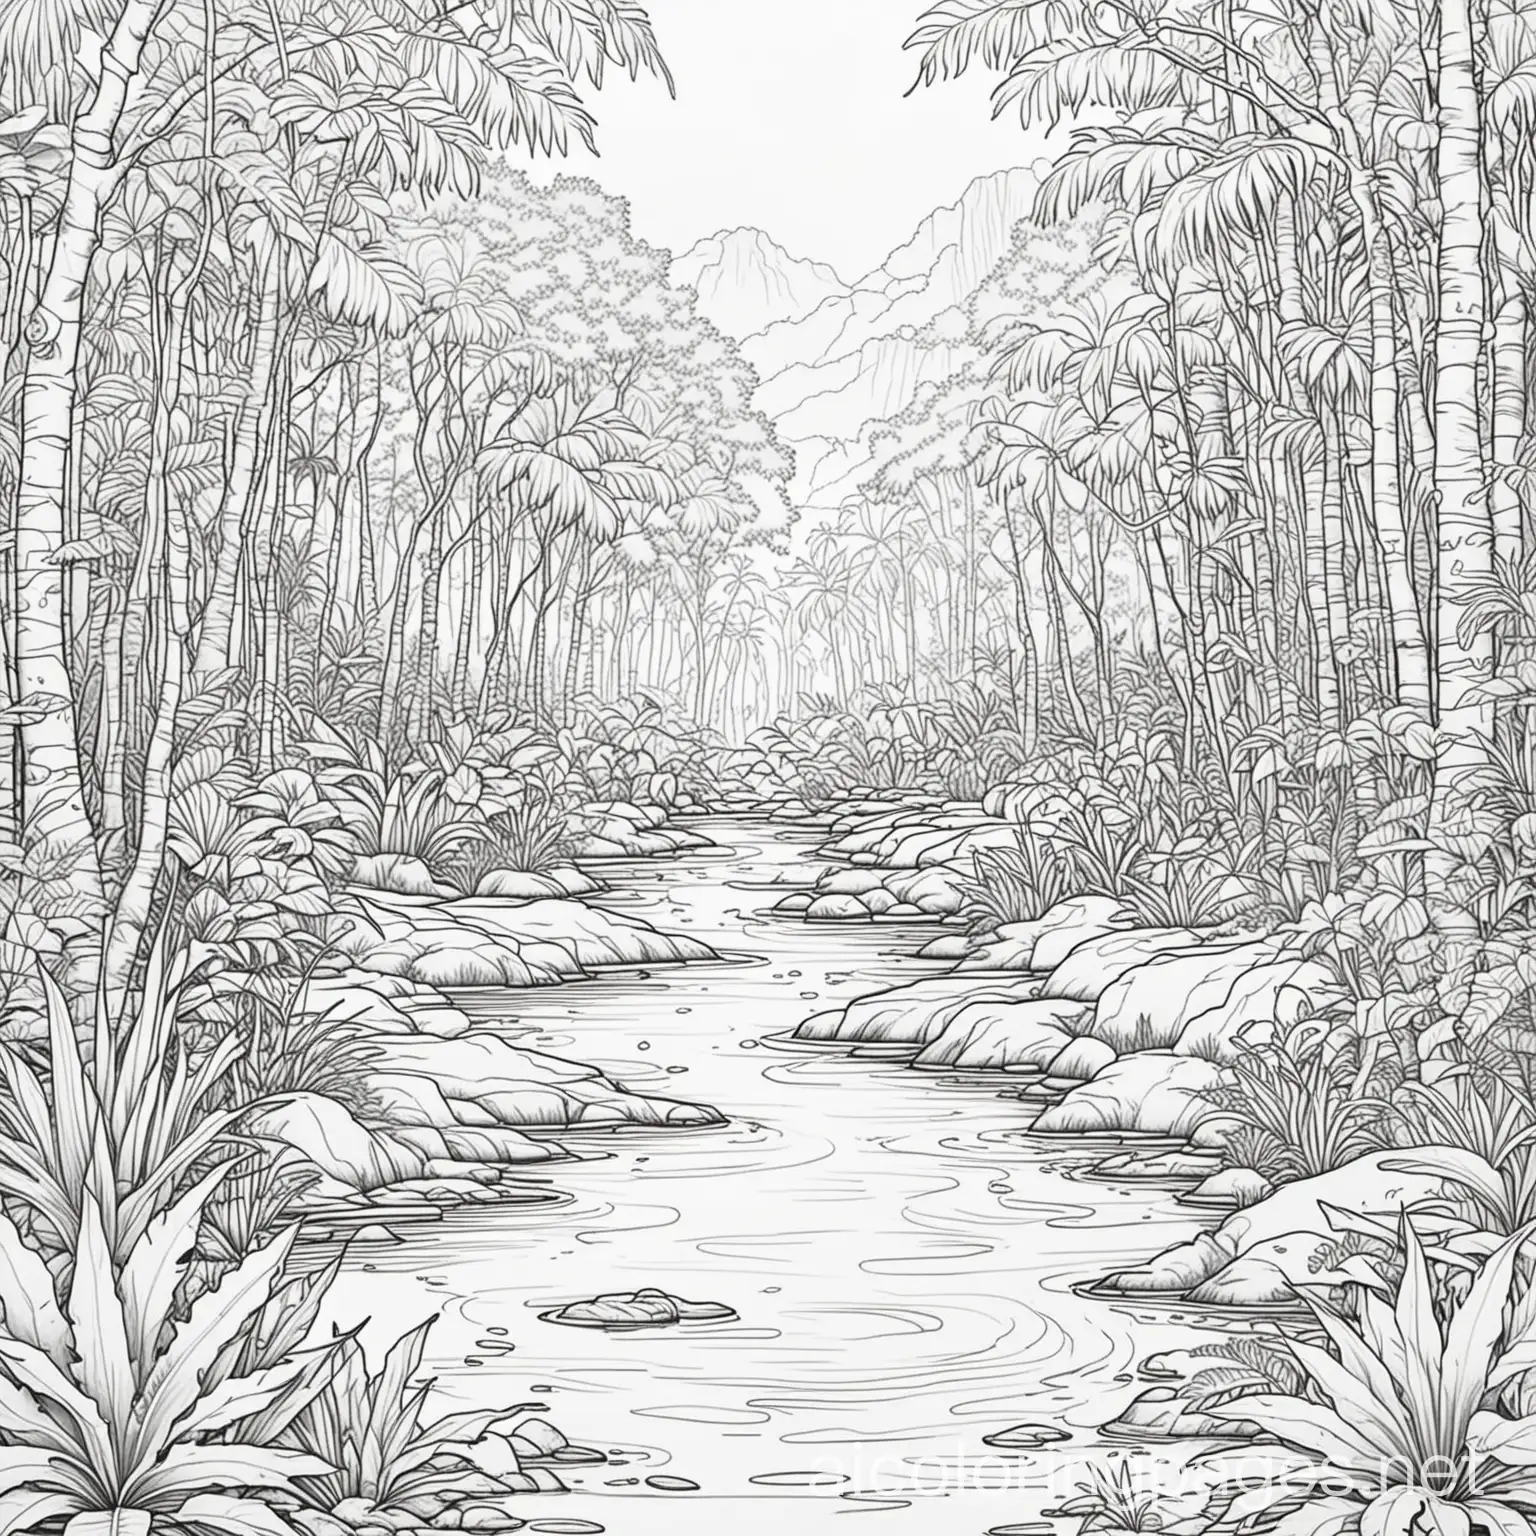 jungle water , Coloring Page, black and white, line art, white background, Simplicity, Ample White Space. The background of the coloring page is plain white to make it easy for young children to color within the lines. The outlines of all the subjects are easy to distinguish, making it simple for kids to color without too much difficulty